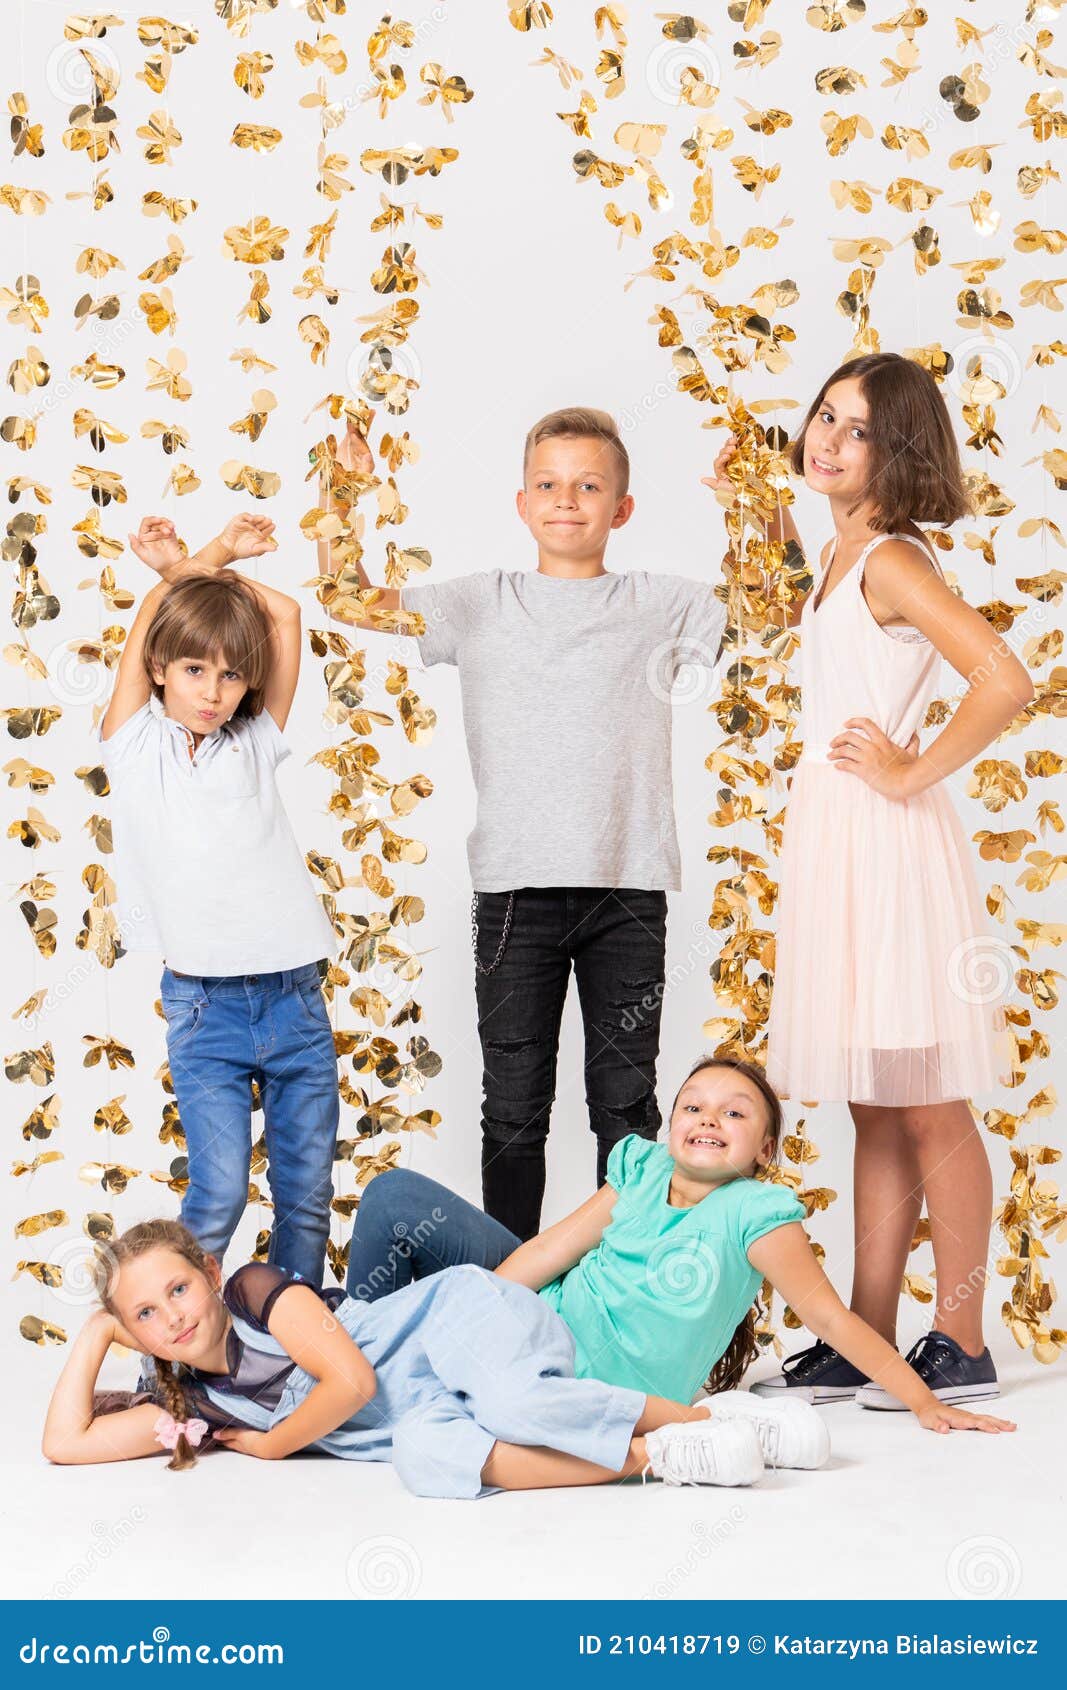 Silly Family Poses Image & Photo (Free Trial) | Bigstock